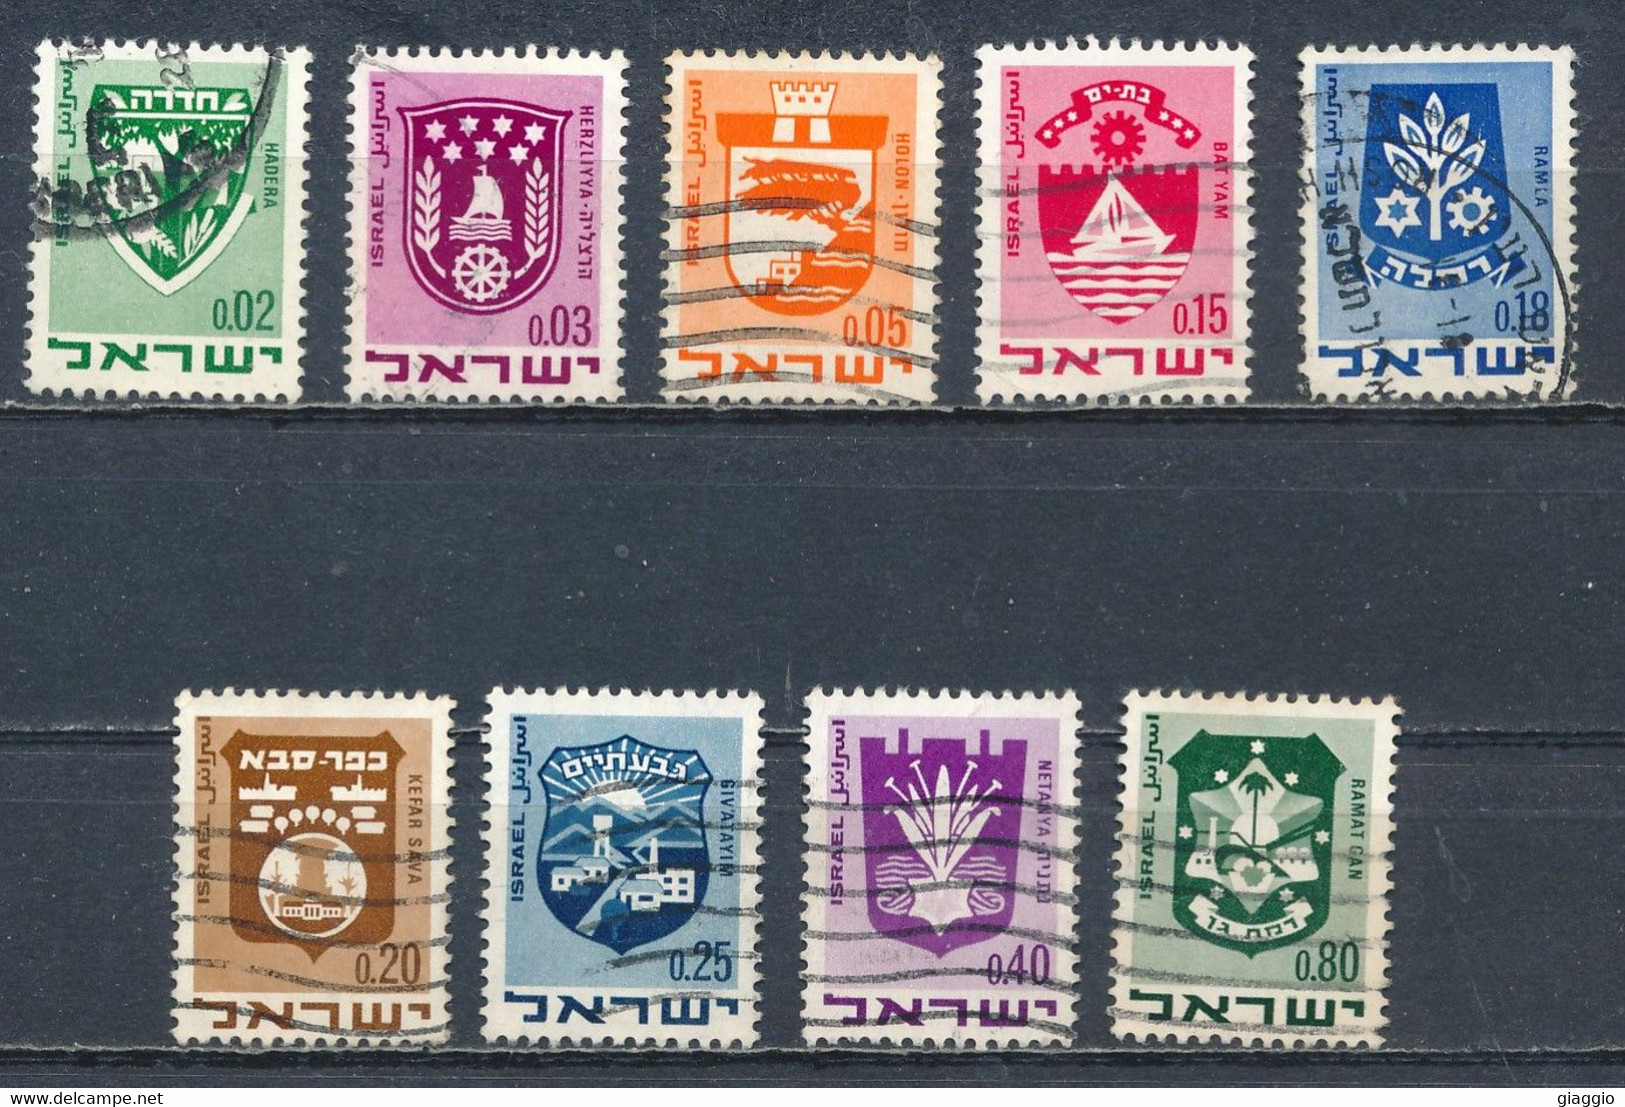 °°° ISRAEL - Y&T N°379/86 - 1969 °°° - Used Stamps (without Tabs)